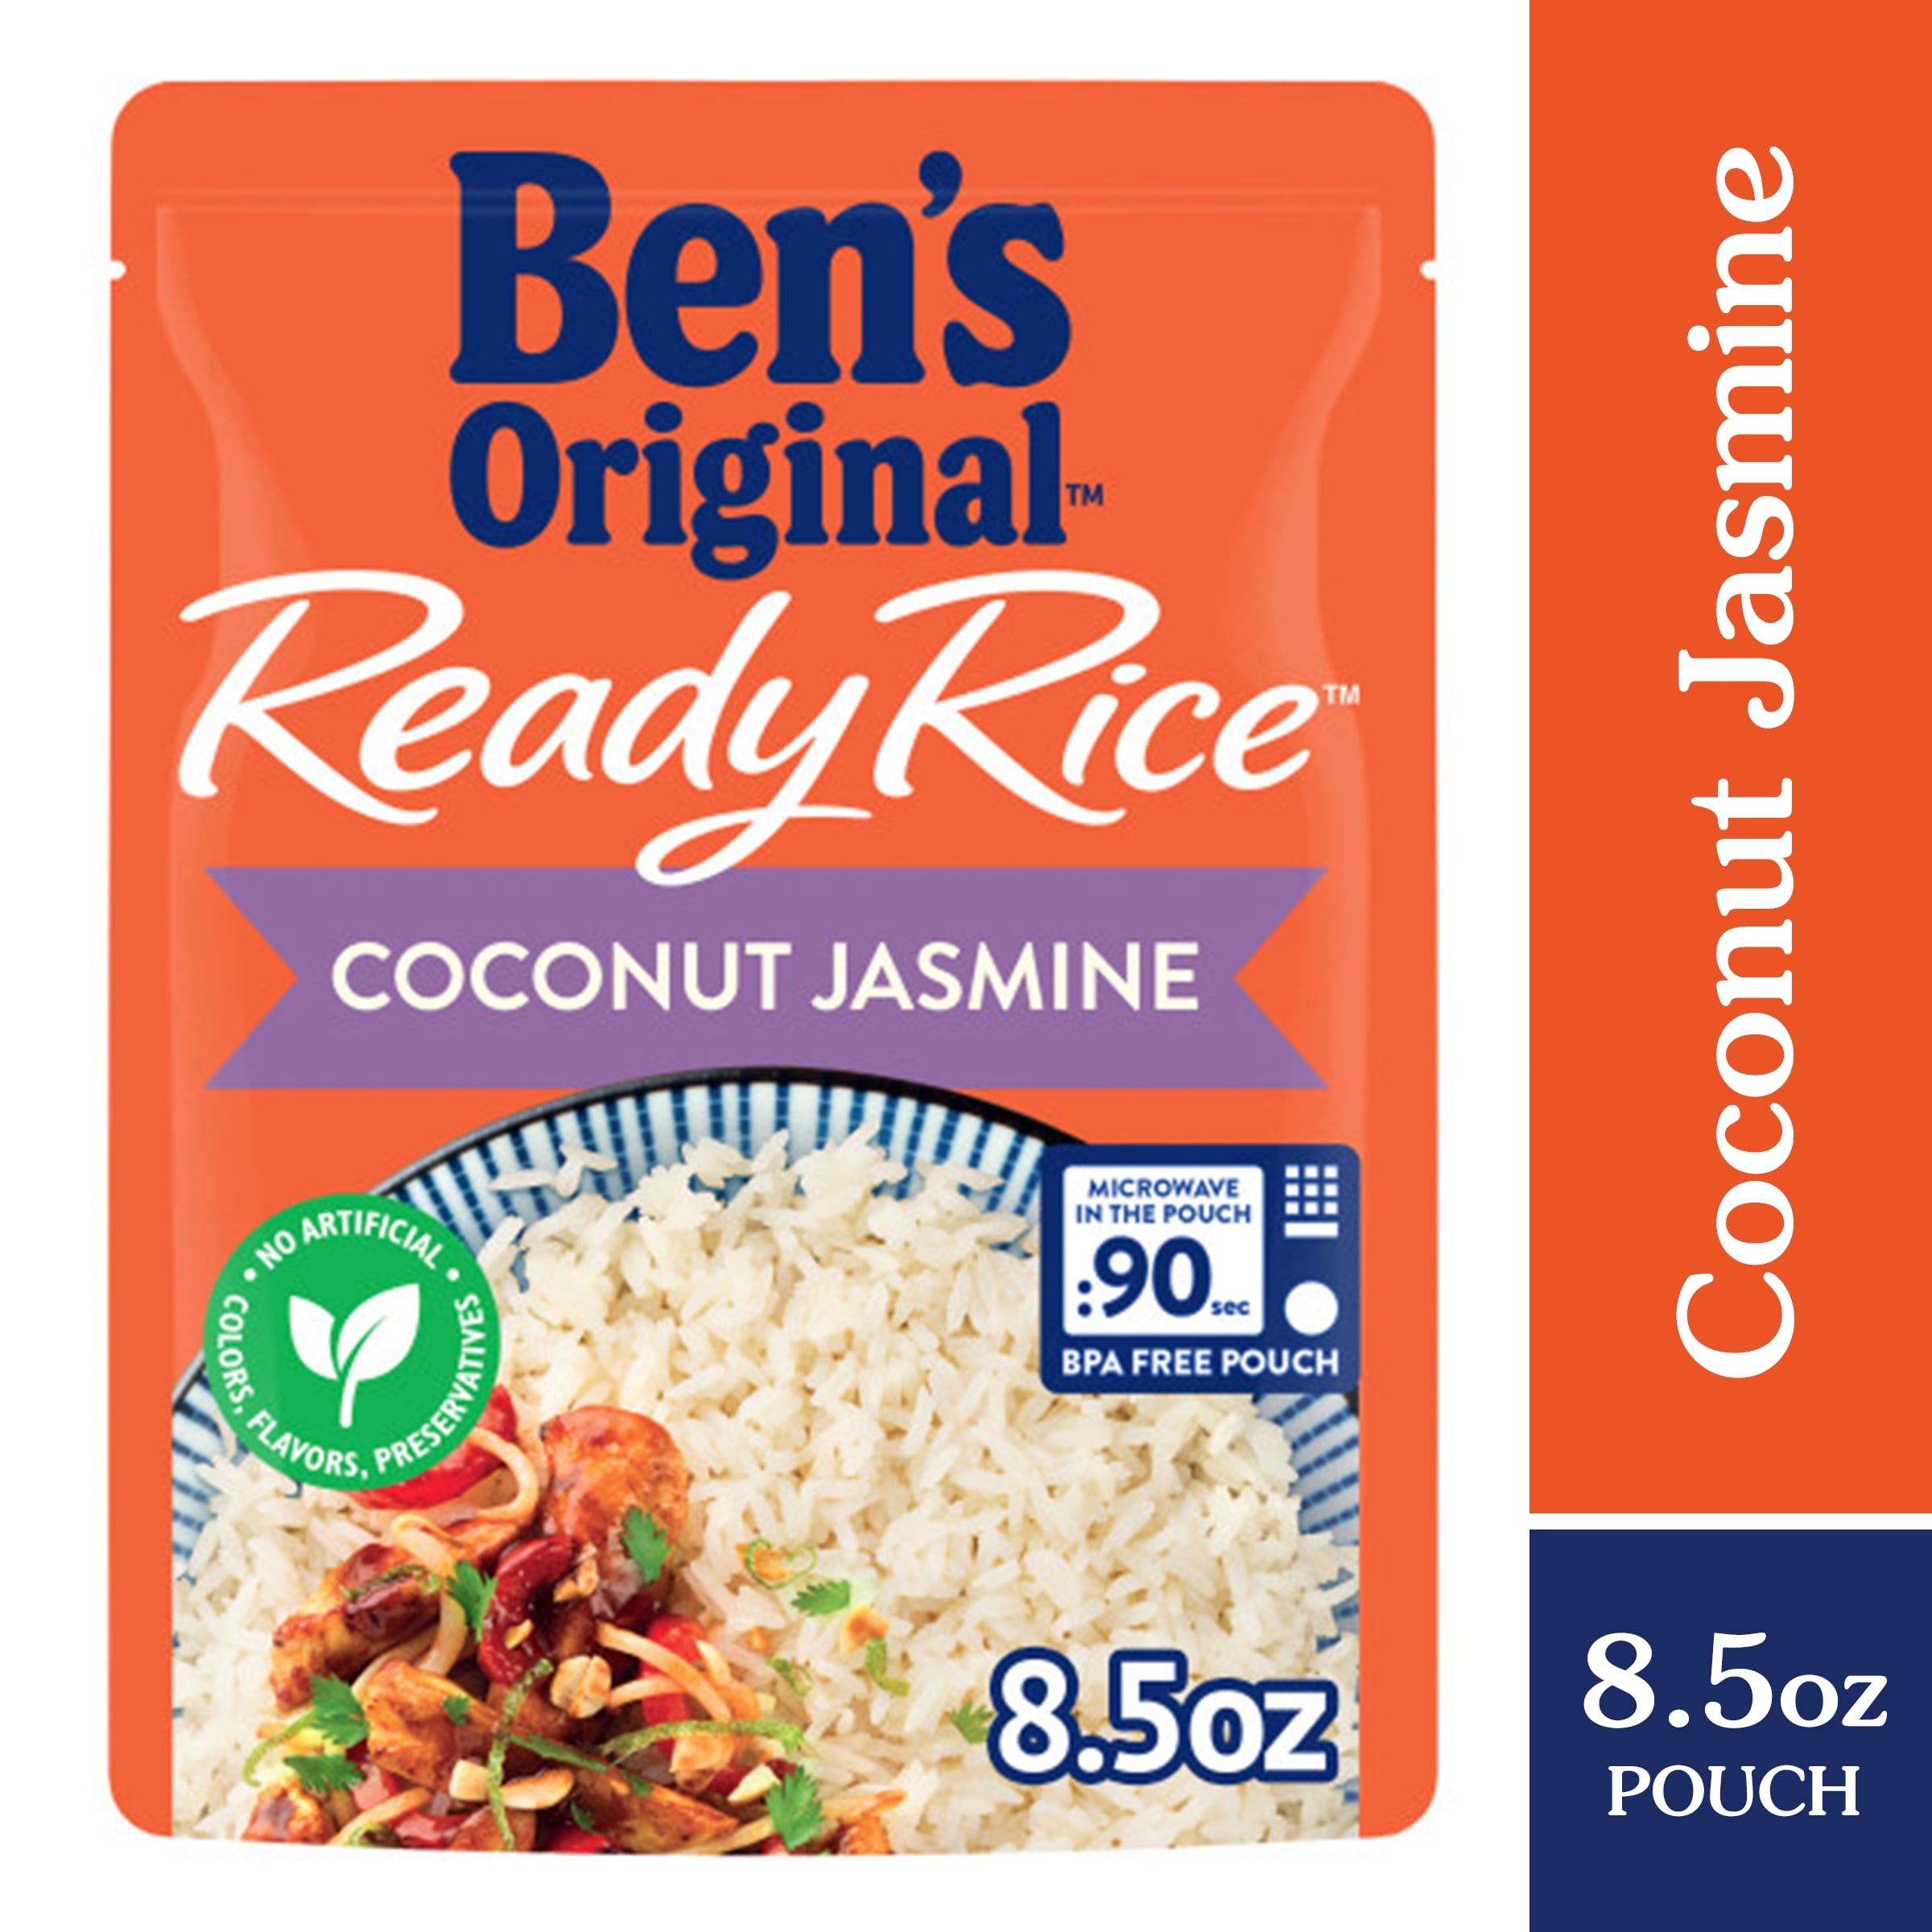 BEN'S ORIGINAL Ready Rice Coconut Jasmine Flavored Rice, Easy Dinner Side, 8.5 OZ Pouch